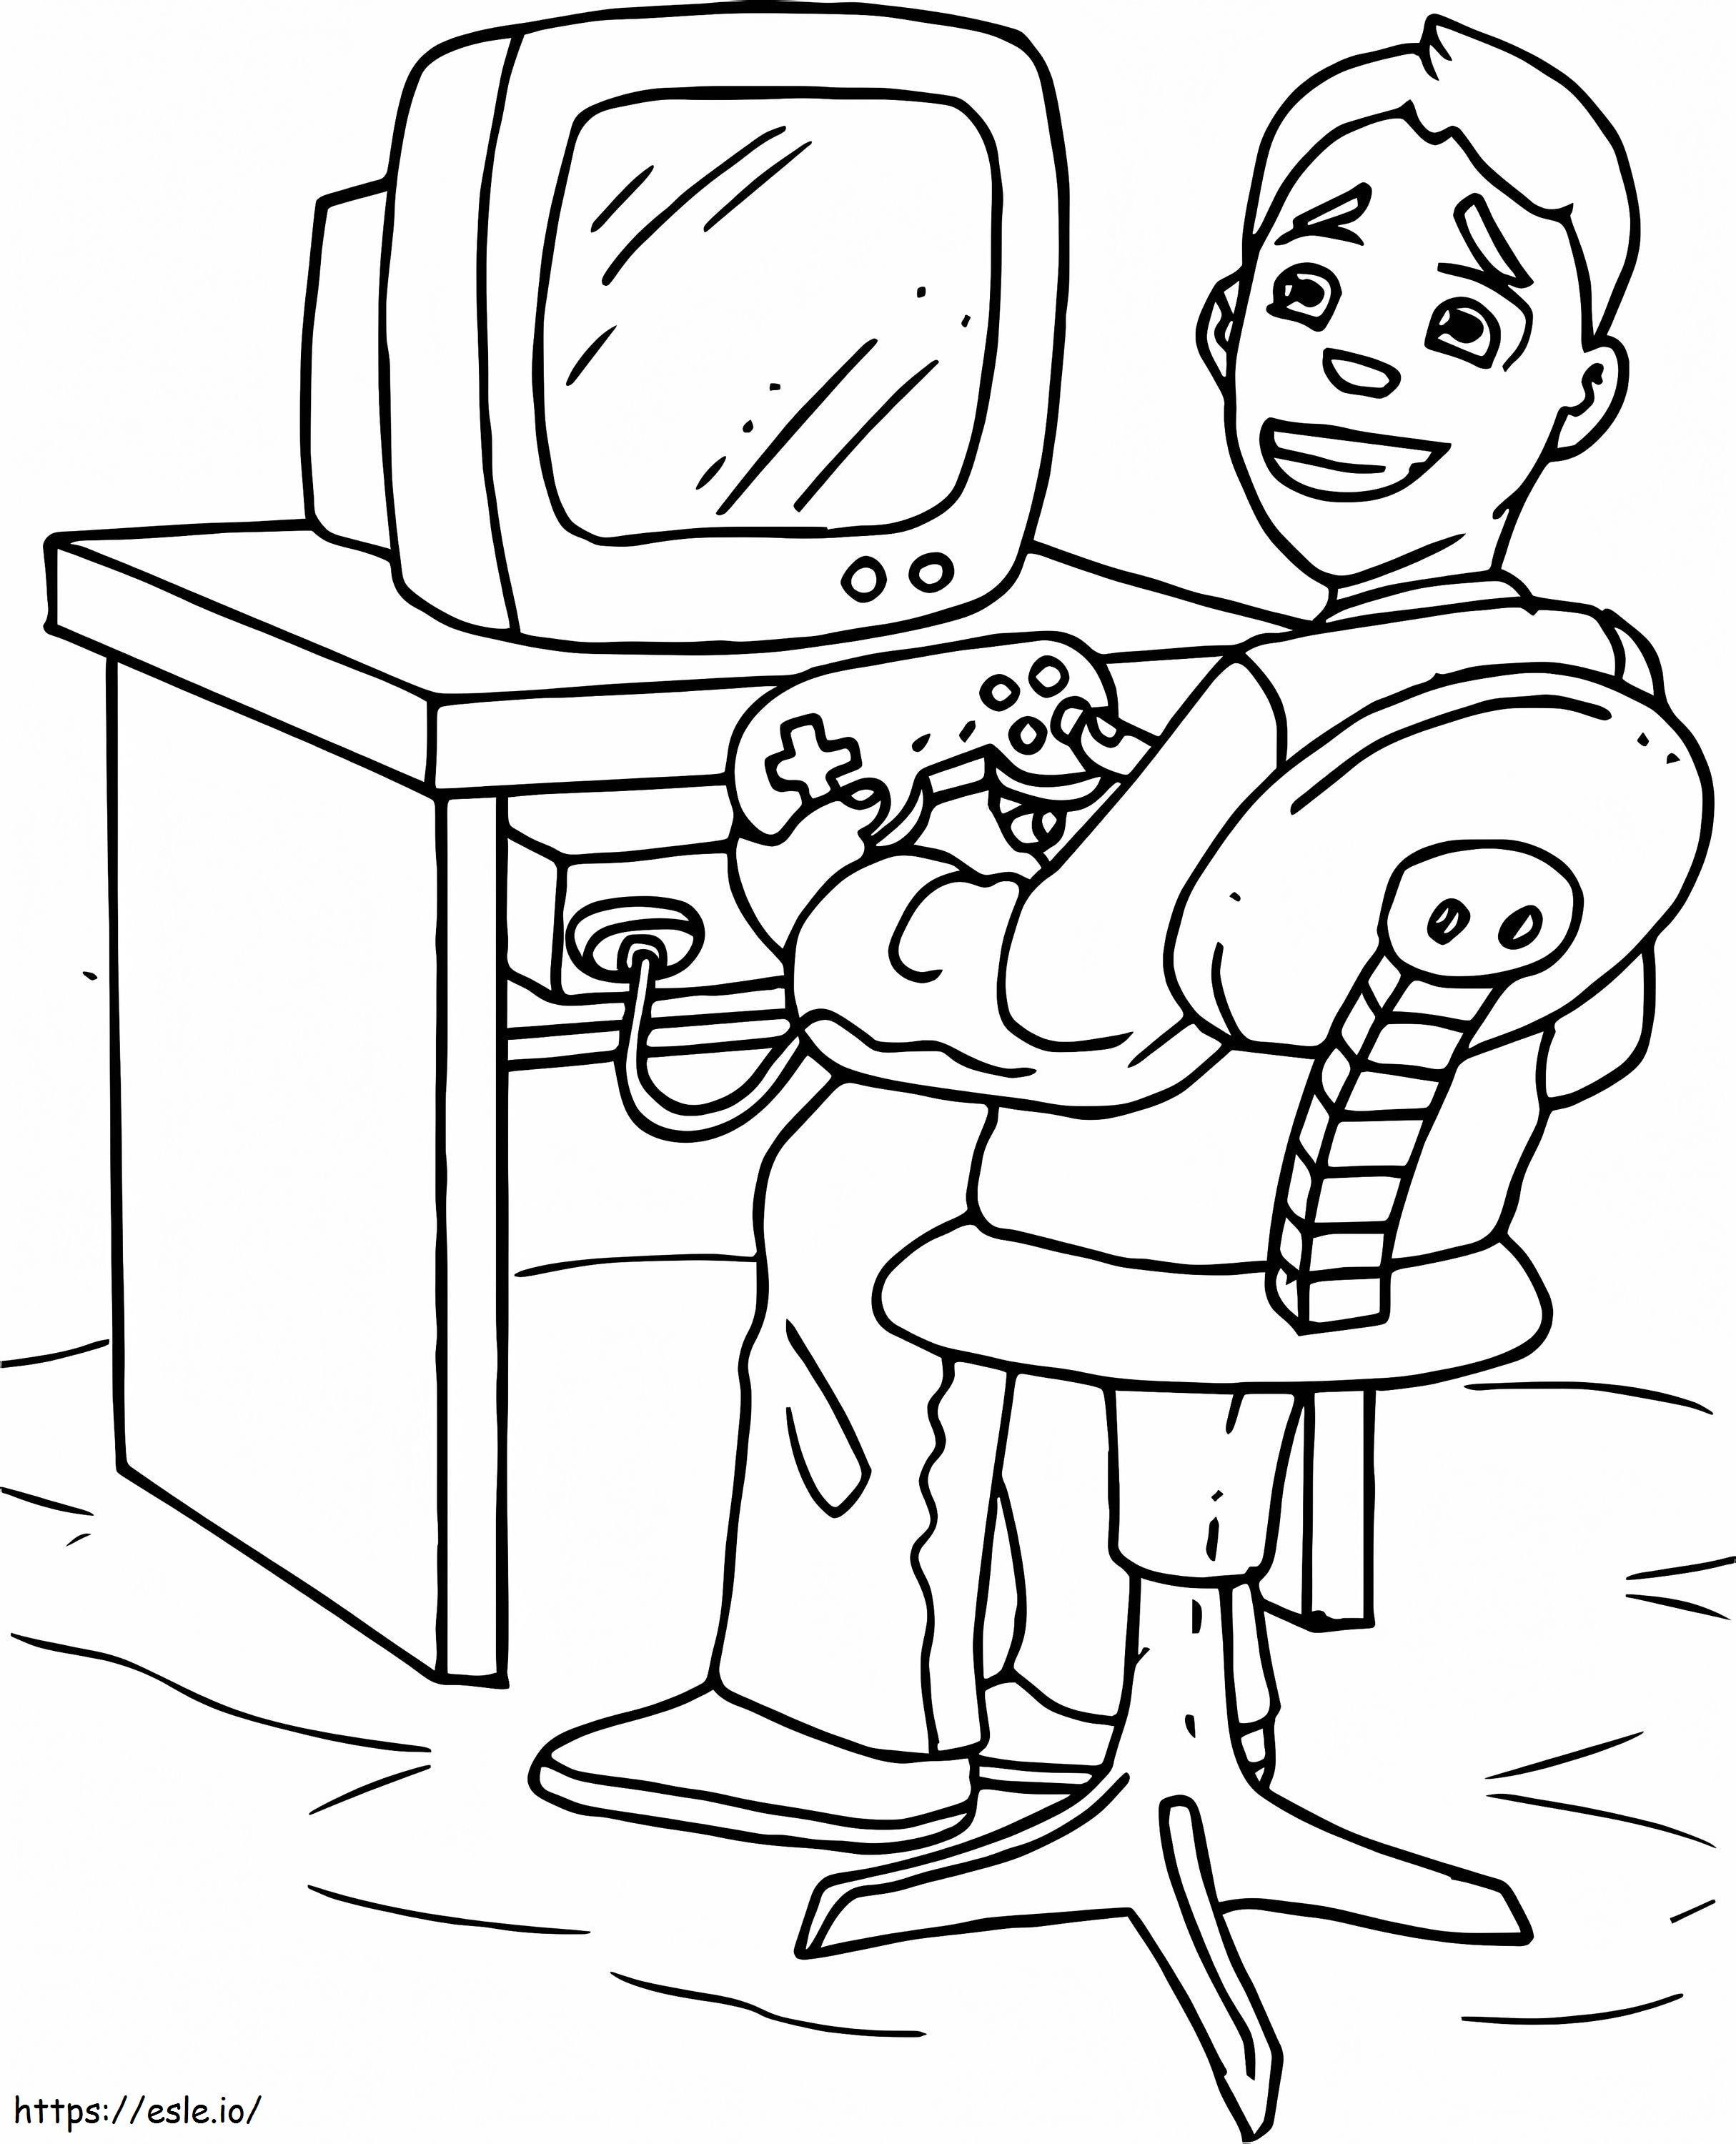 Boy Playing Video Games coloring page